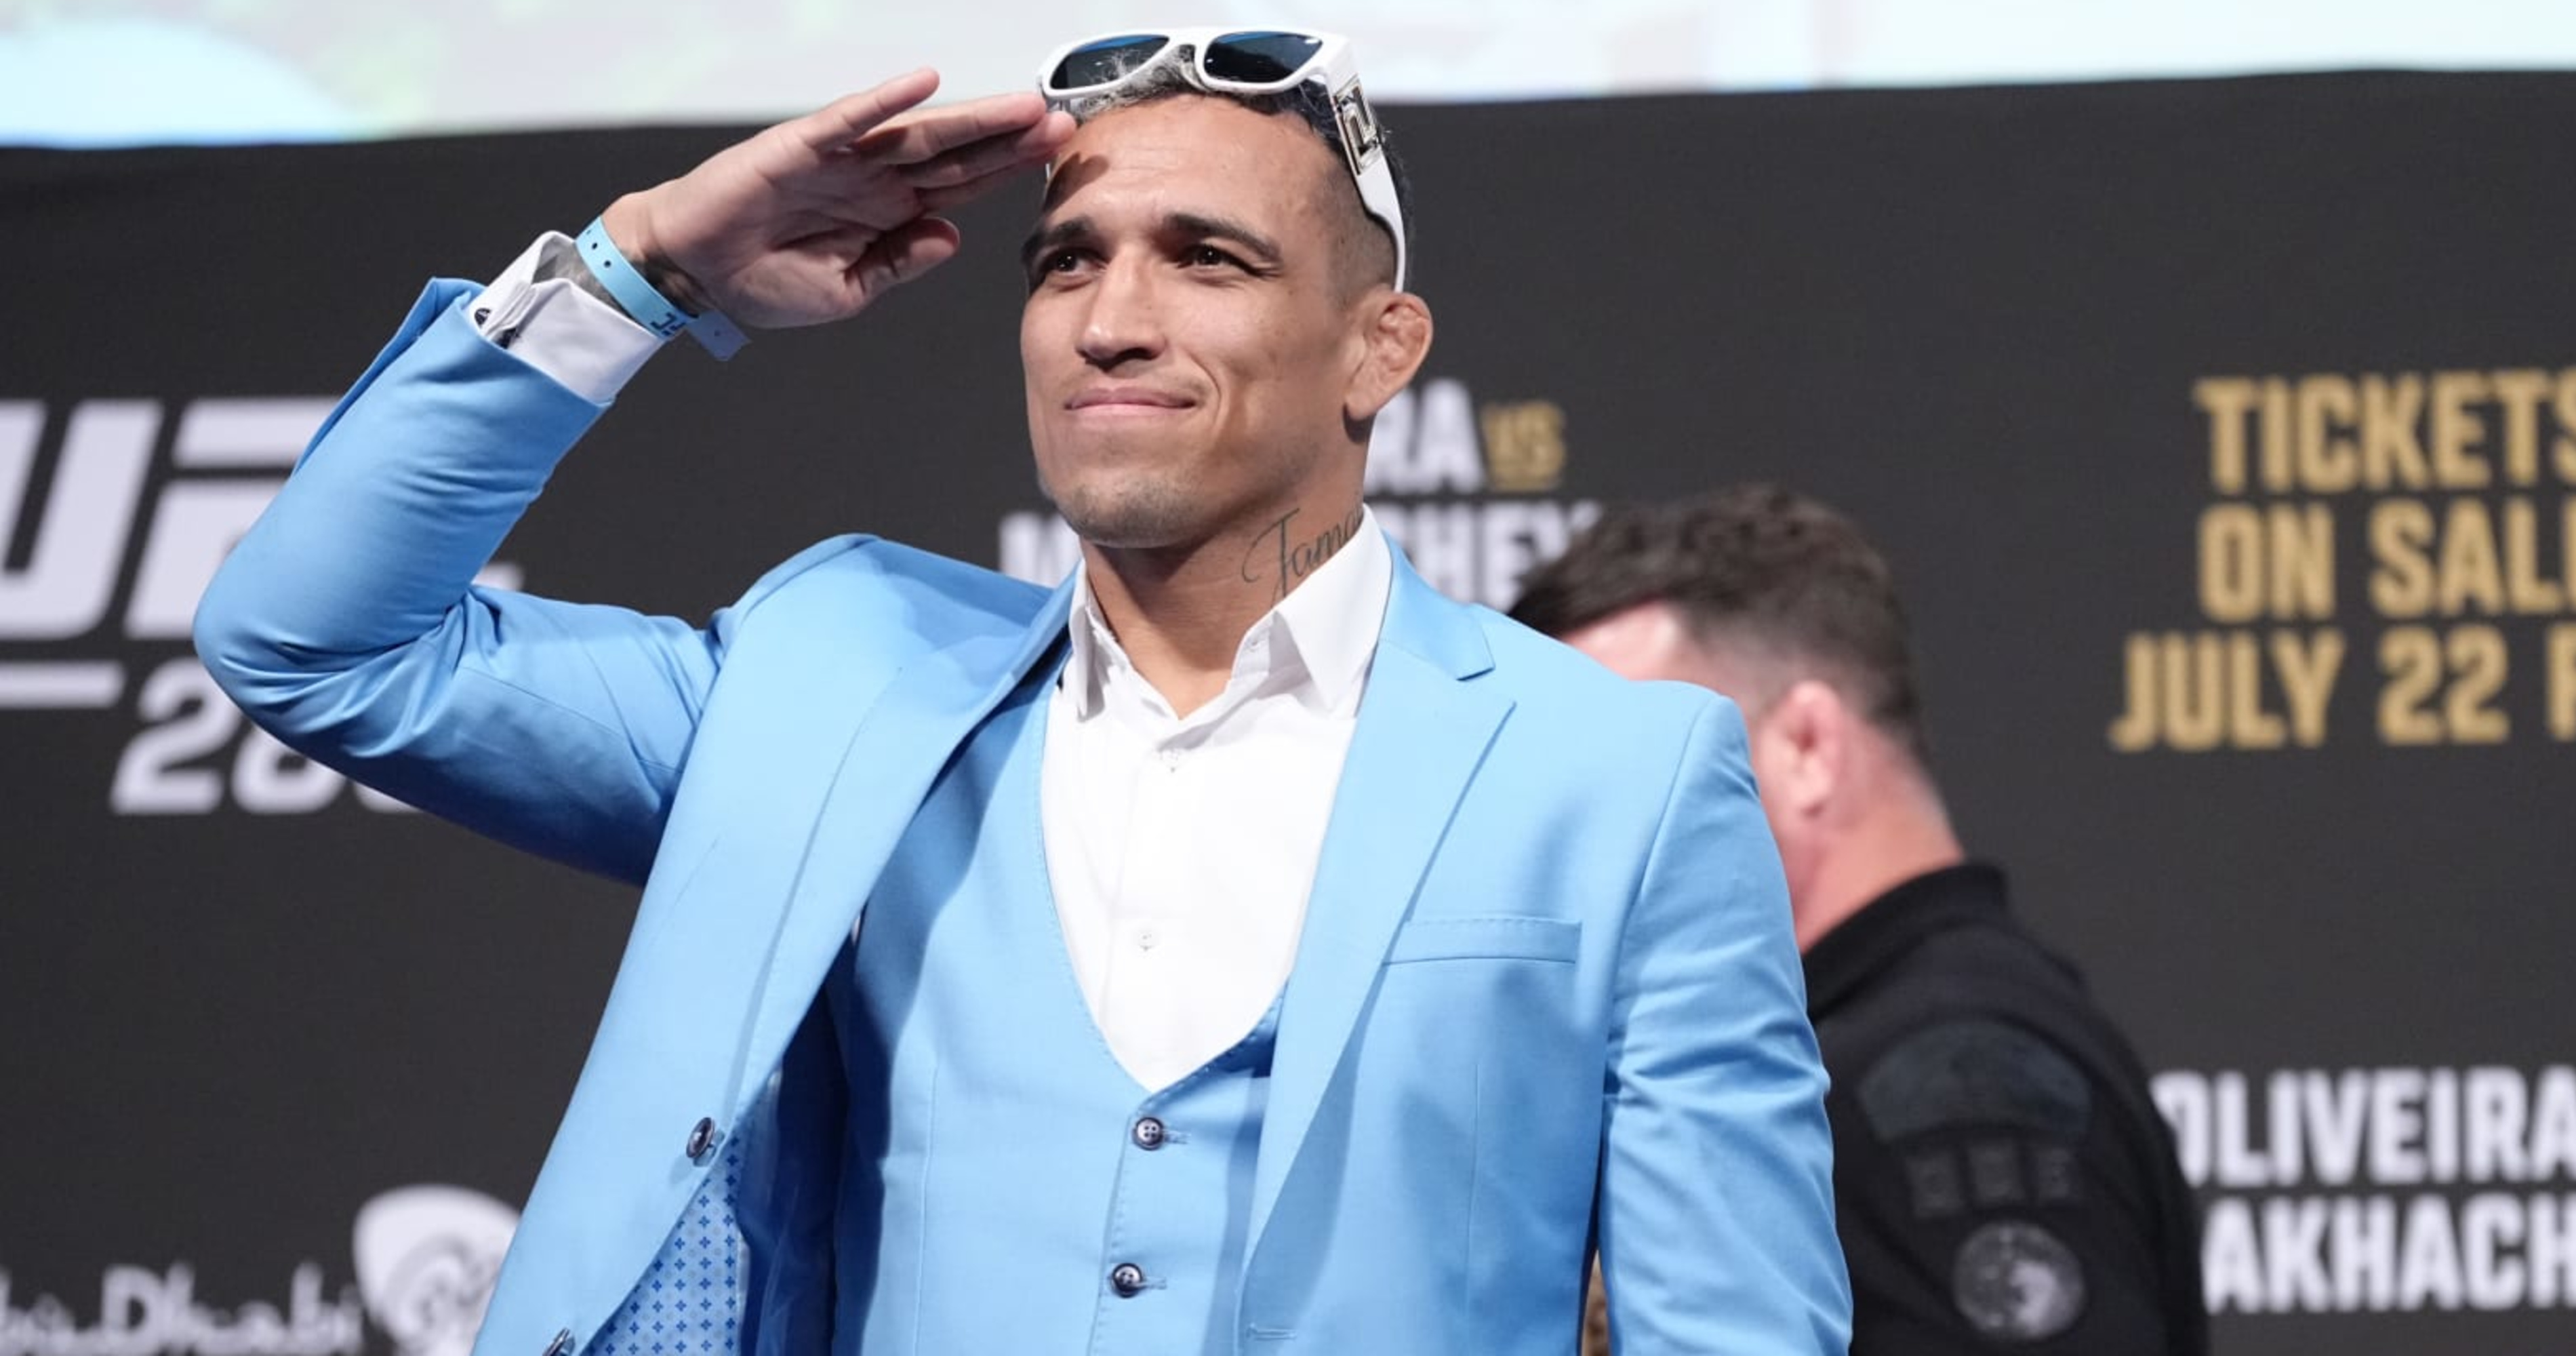 UFC 280: Best Bets for Charles Oliveira vs. Islam Makhachev and the Rest of the Card